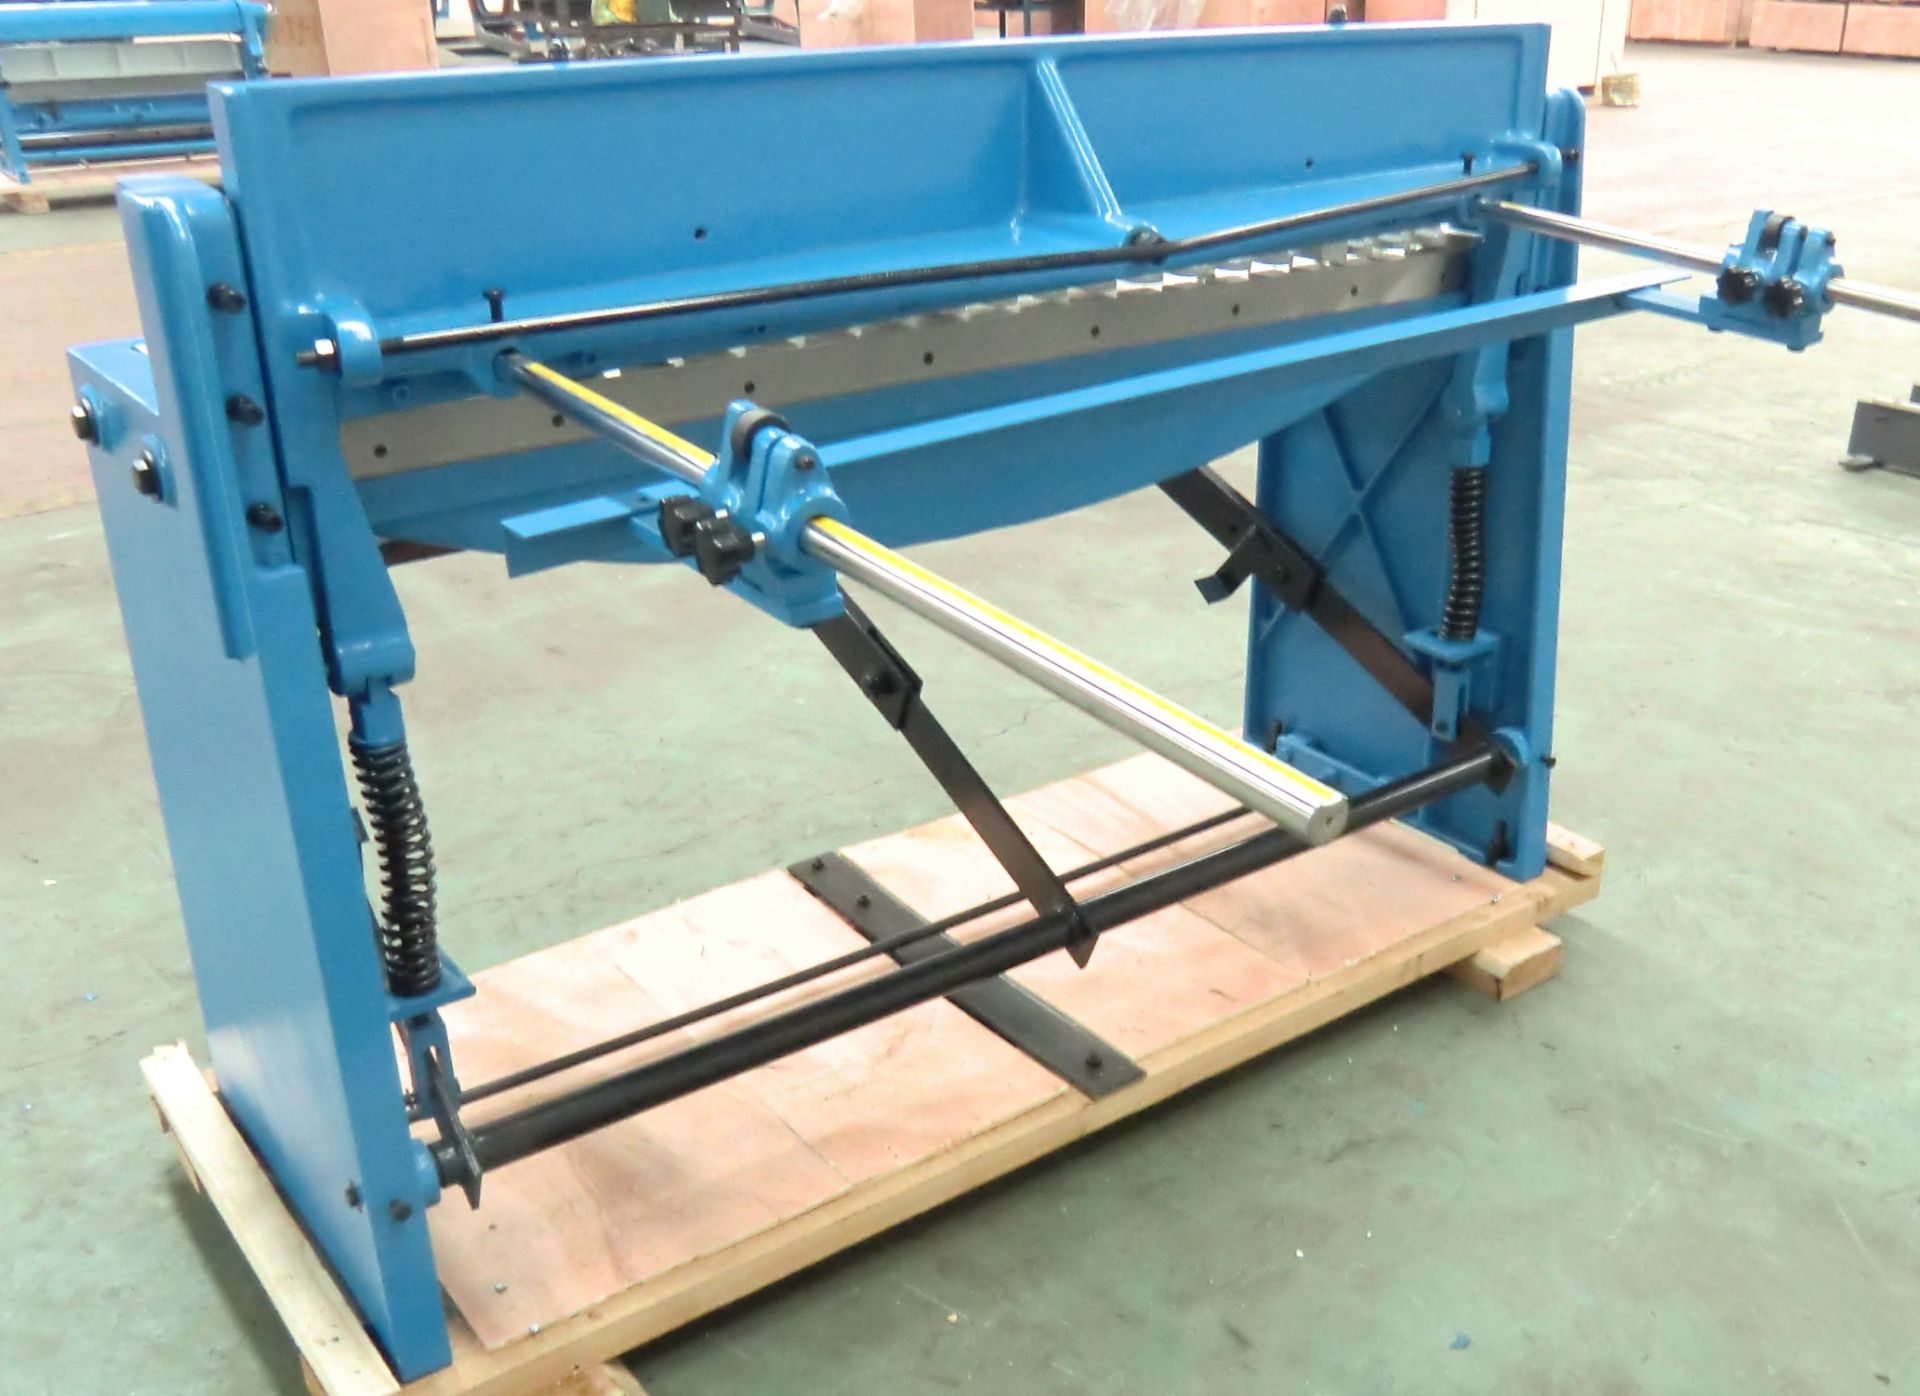 Manual Shear with foot control 52" wide 16 Gauge thickness with back gauge up to 33" - Image 2 of 3